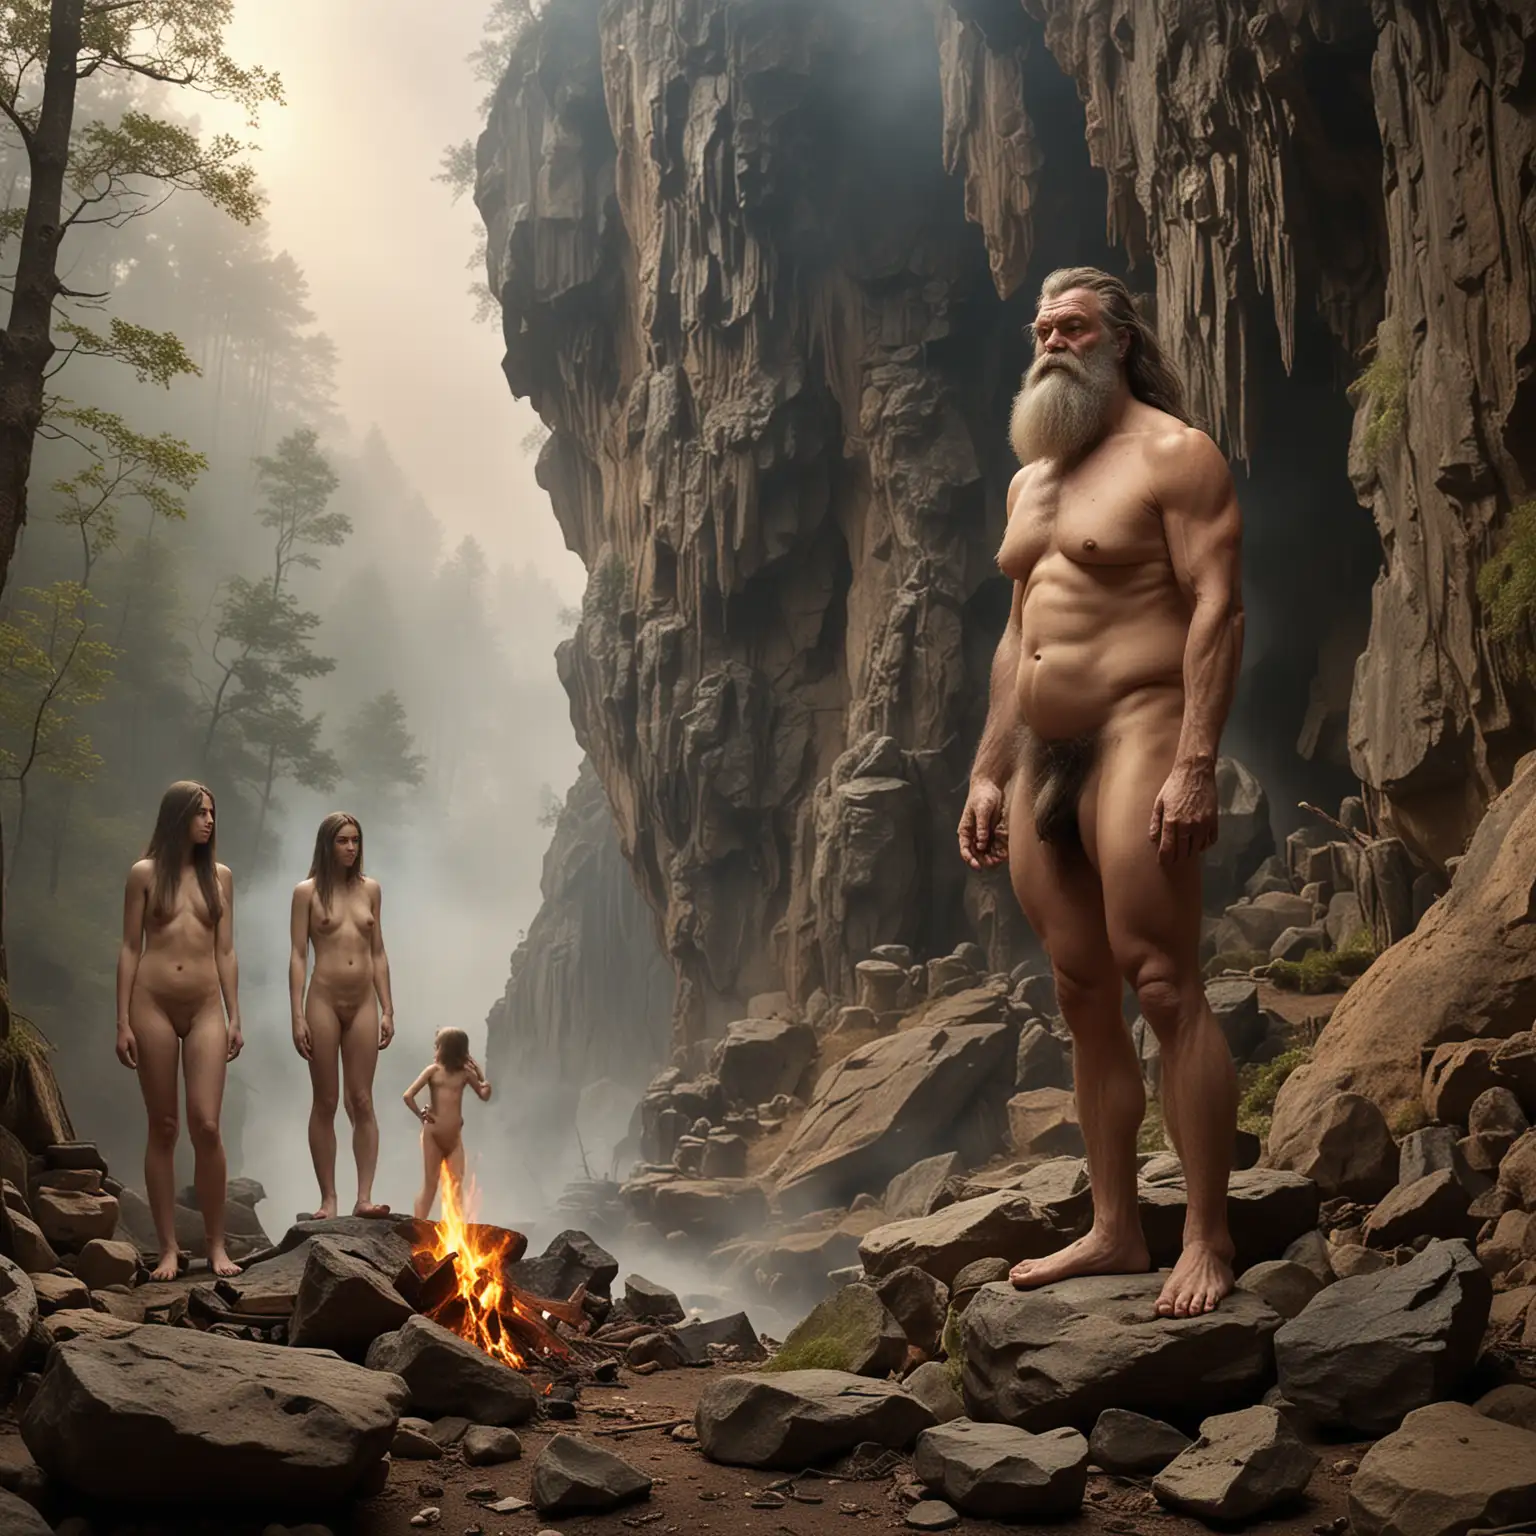 Ancient Hill Giant Cooking with Three Young Women in Misty Forest Cave